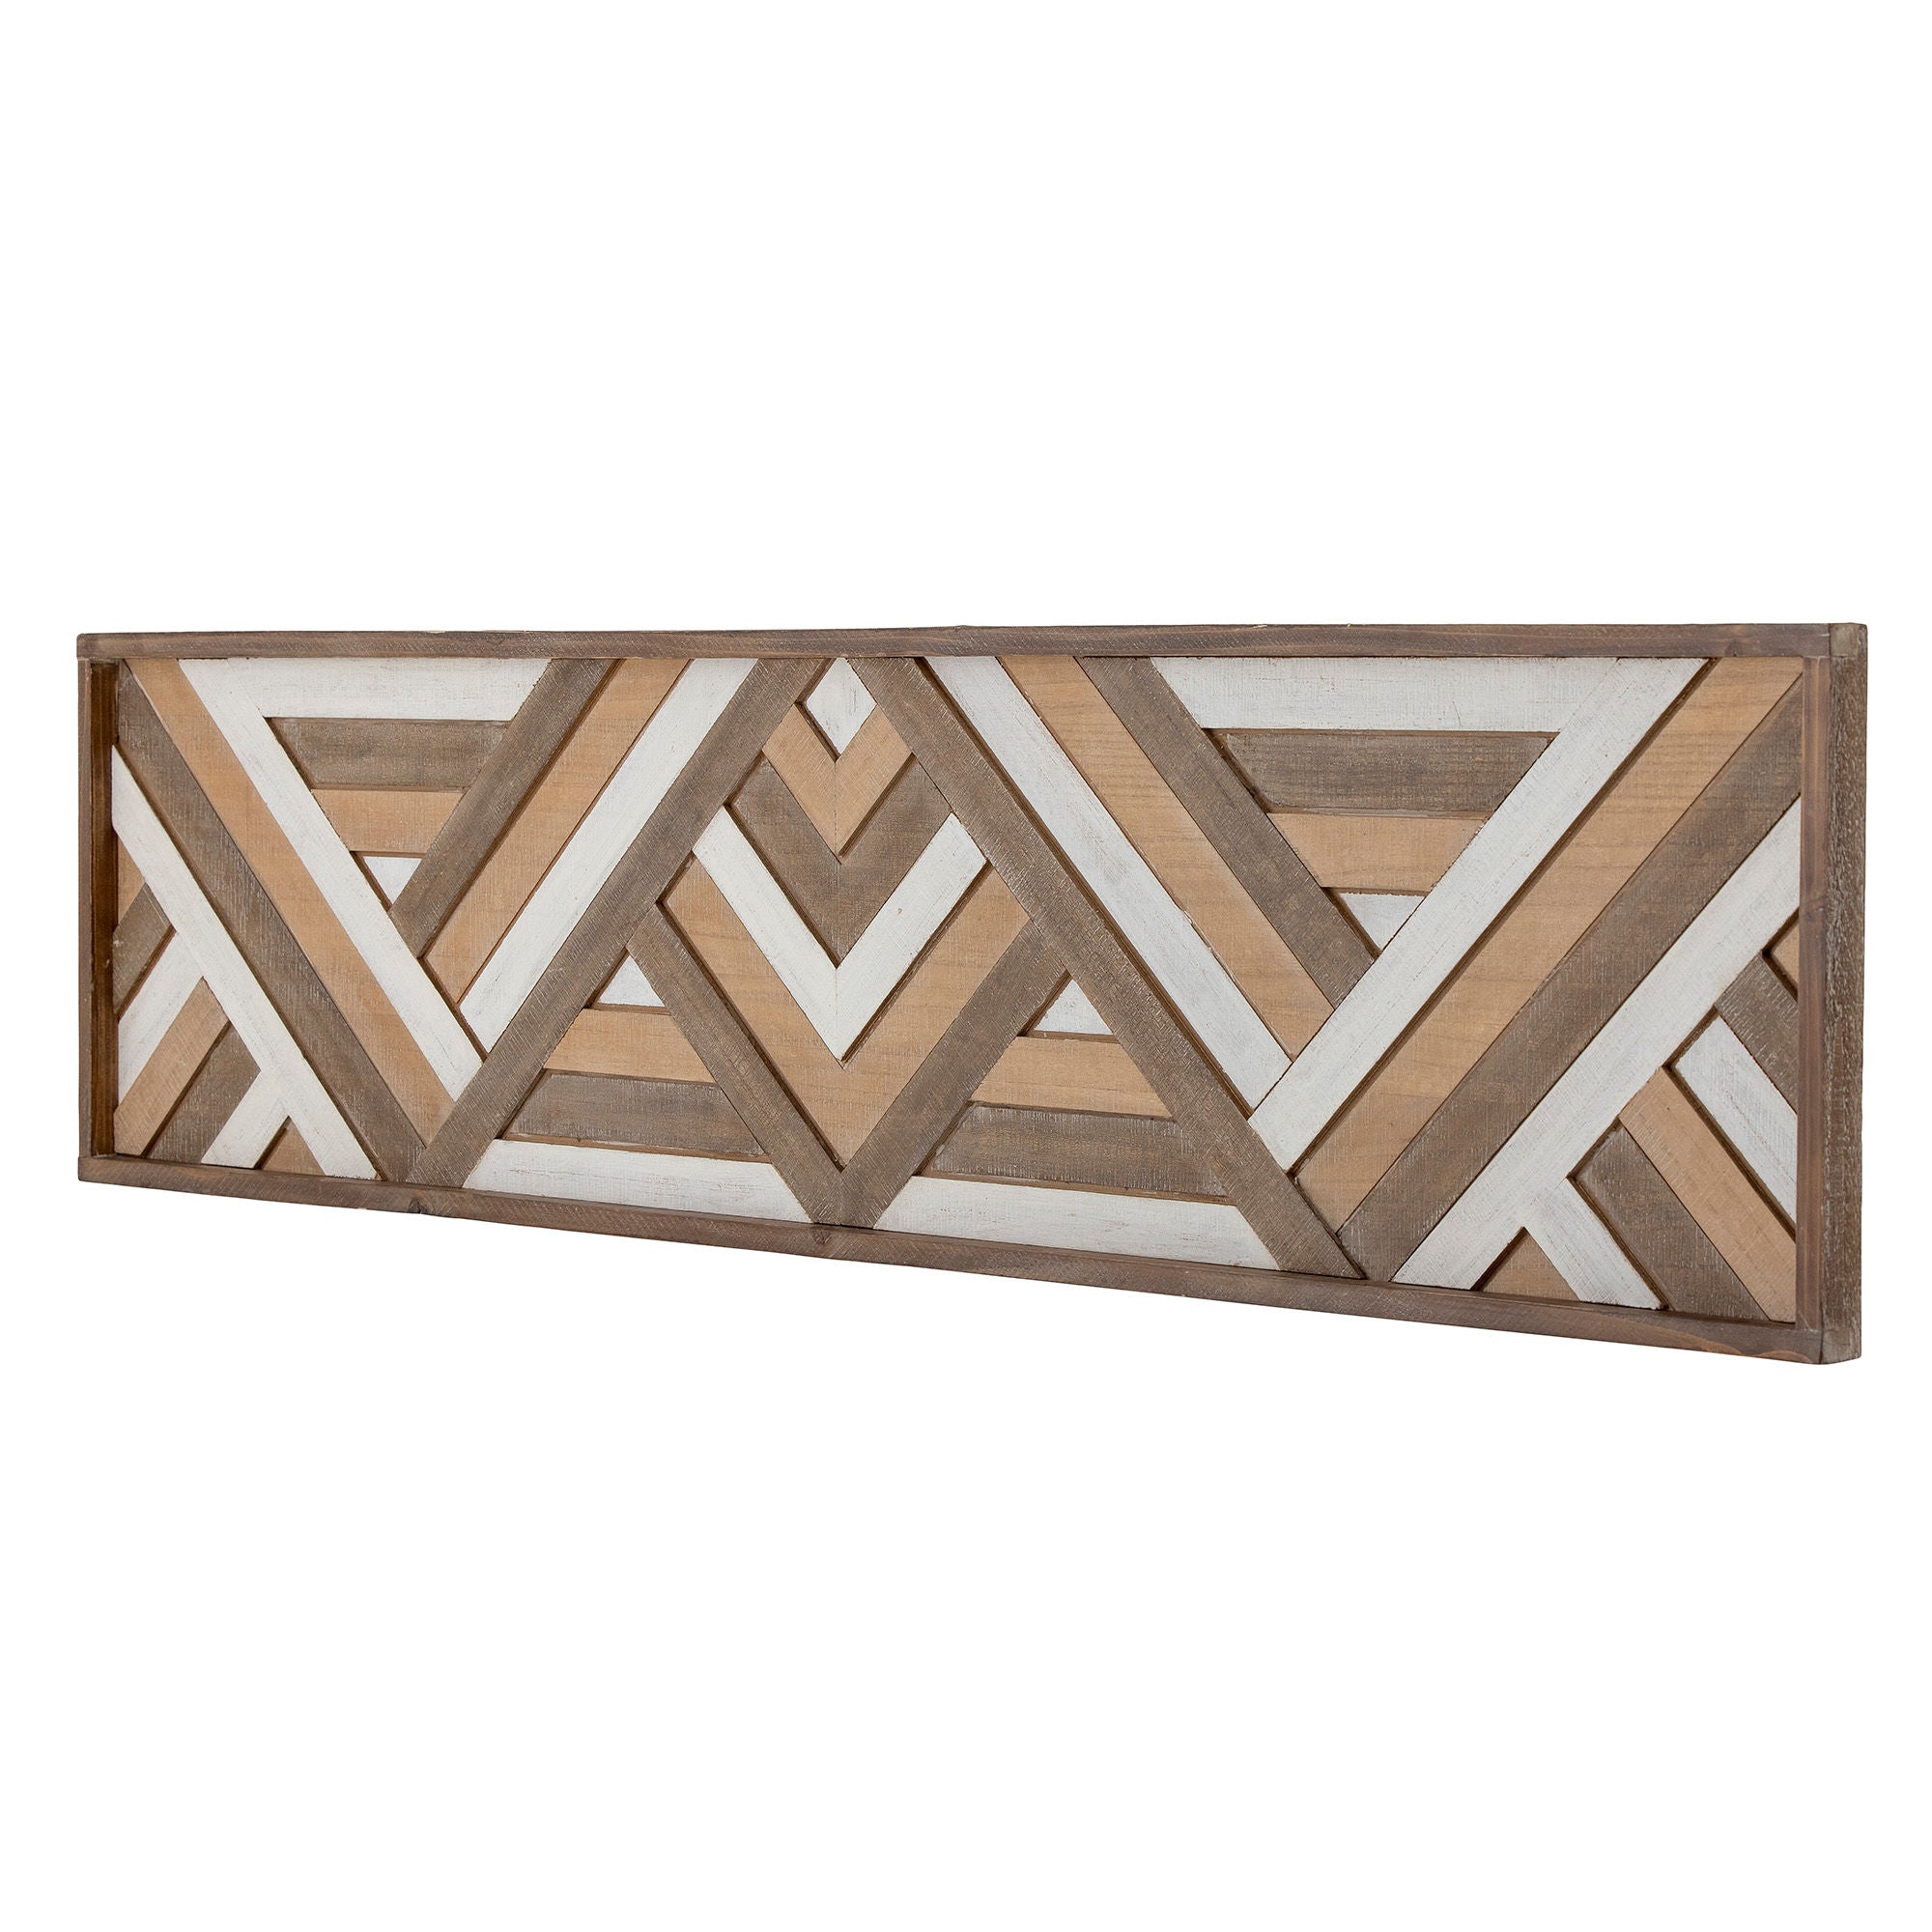 Creative Collection Lunna Wall Decor, Brown, MDF